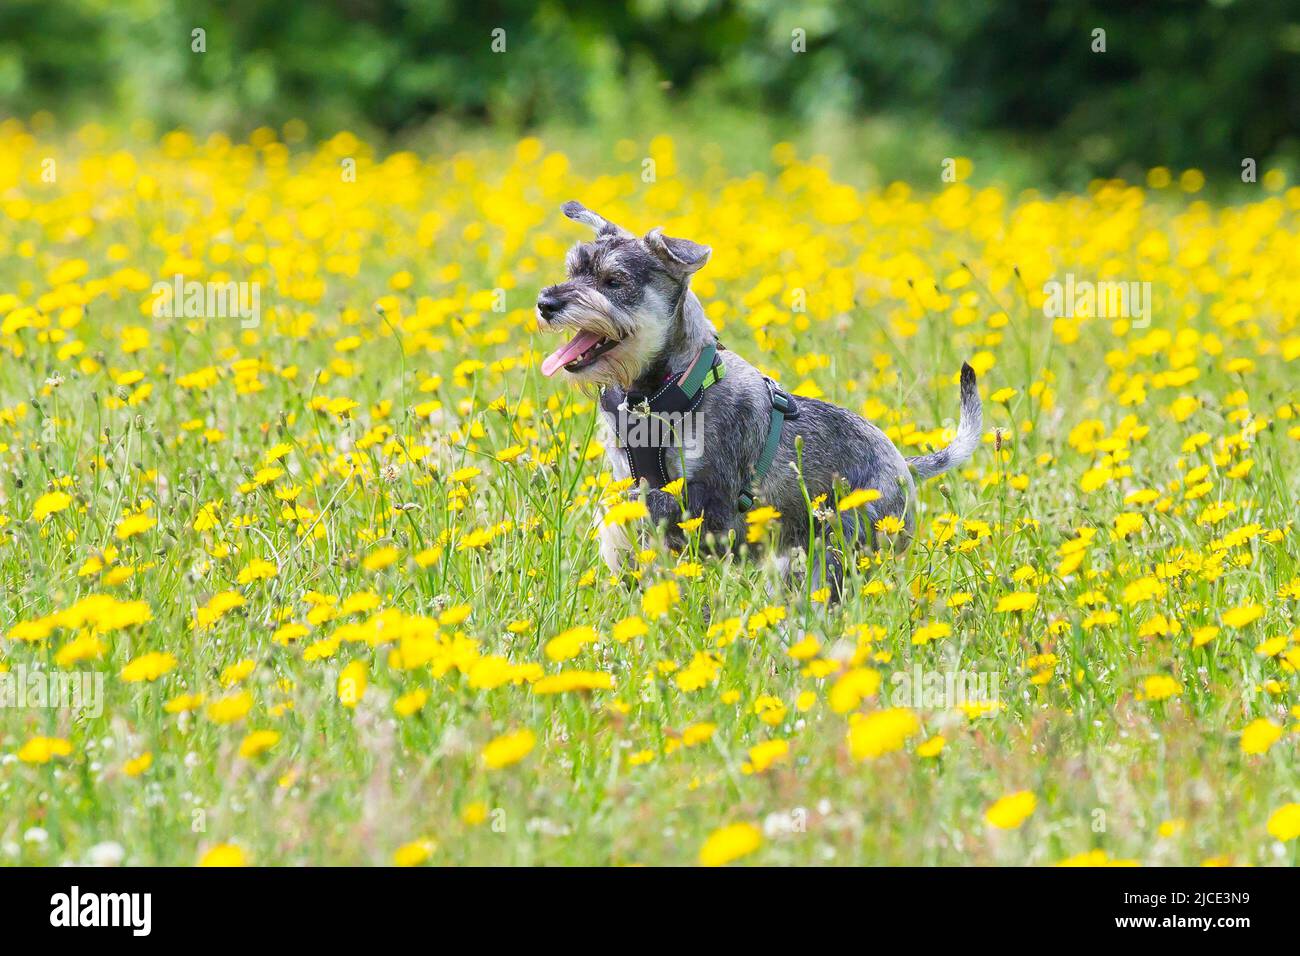 Kidderminster, UK. 12th June. 2022. UK weather: with lovely, warm temperatures and sunny conditions, today is a perfect day to play in the park. This young, pet Schnauzer dog is having so much fun as he races through the dandelions in a country park. Credit: Lee Hudson/Alamy Live News Stock Photo